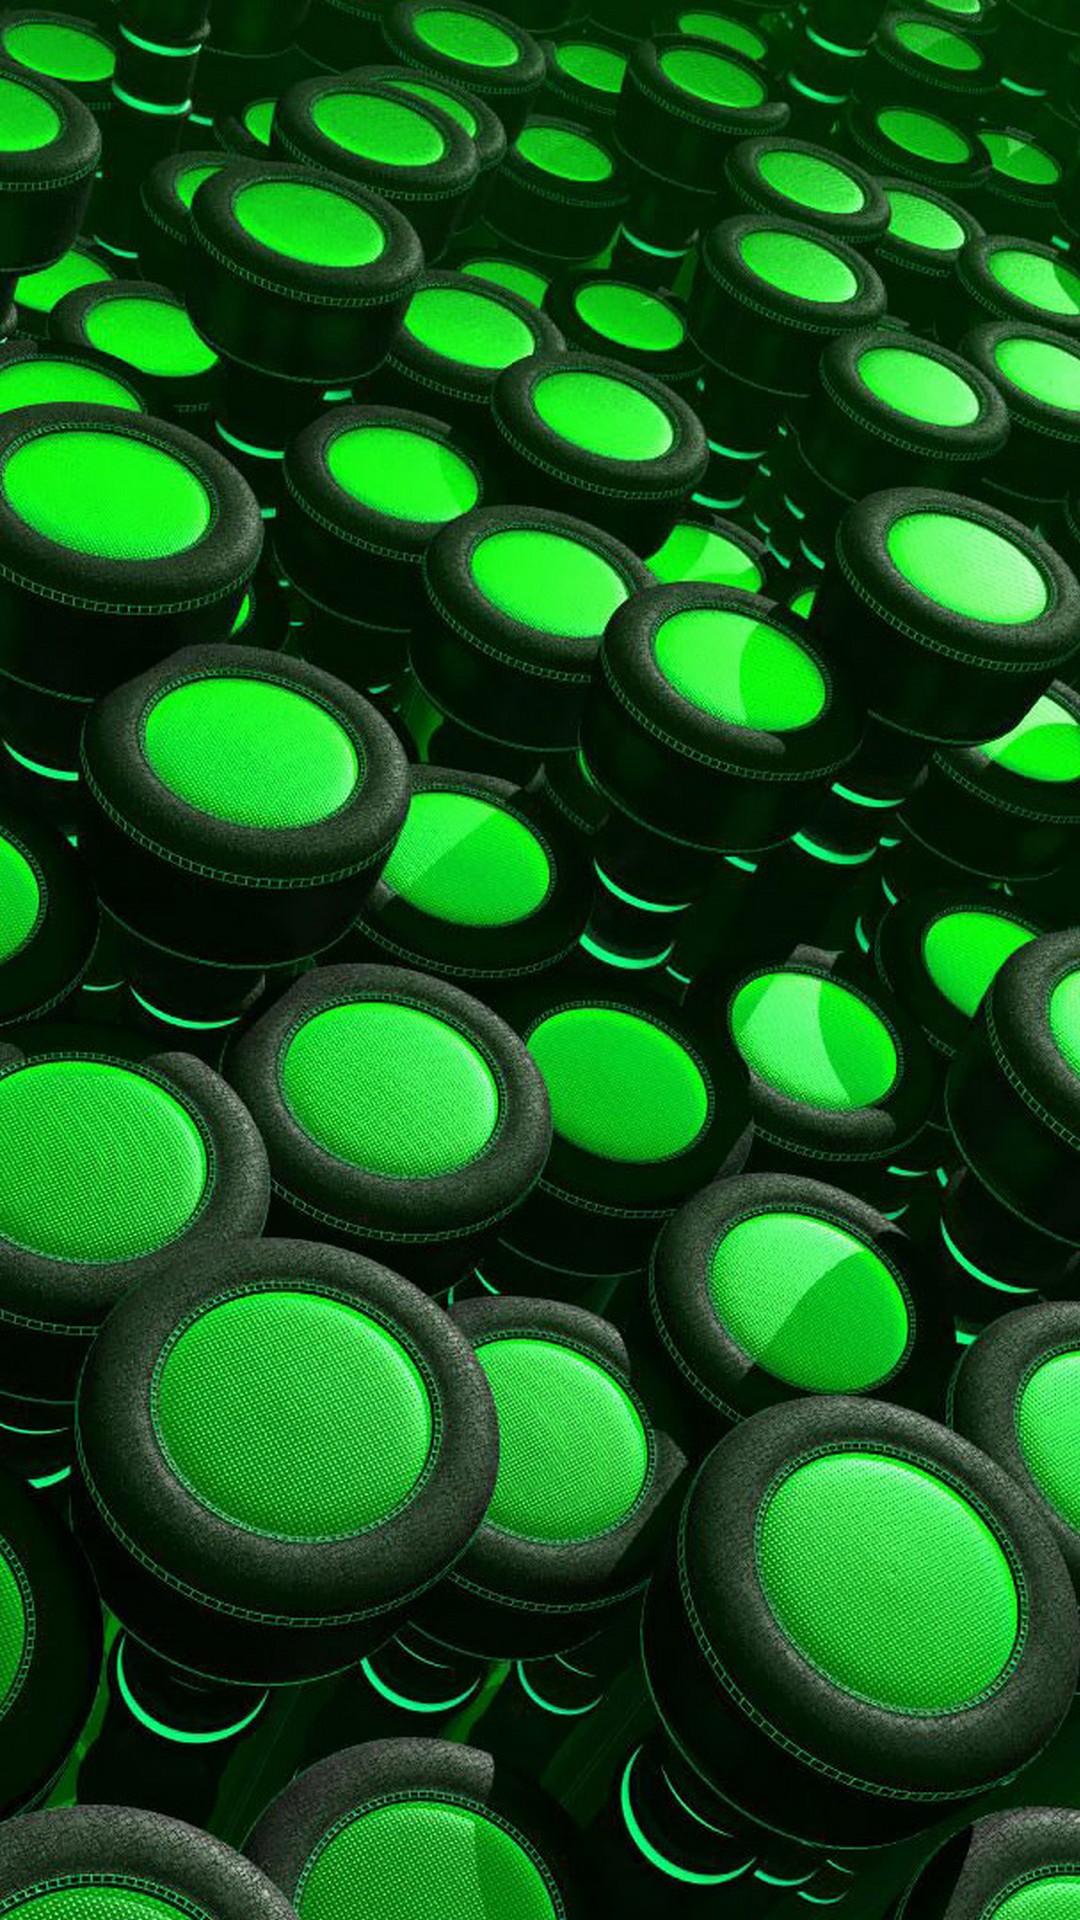 Neon Green Wallpaper Android with image resolution 1080x1920 pixel. You can make this wallpaper for your Android backgrounds, Tablet, Smartphones Screensavers and Mobile Phone Lock Screen